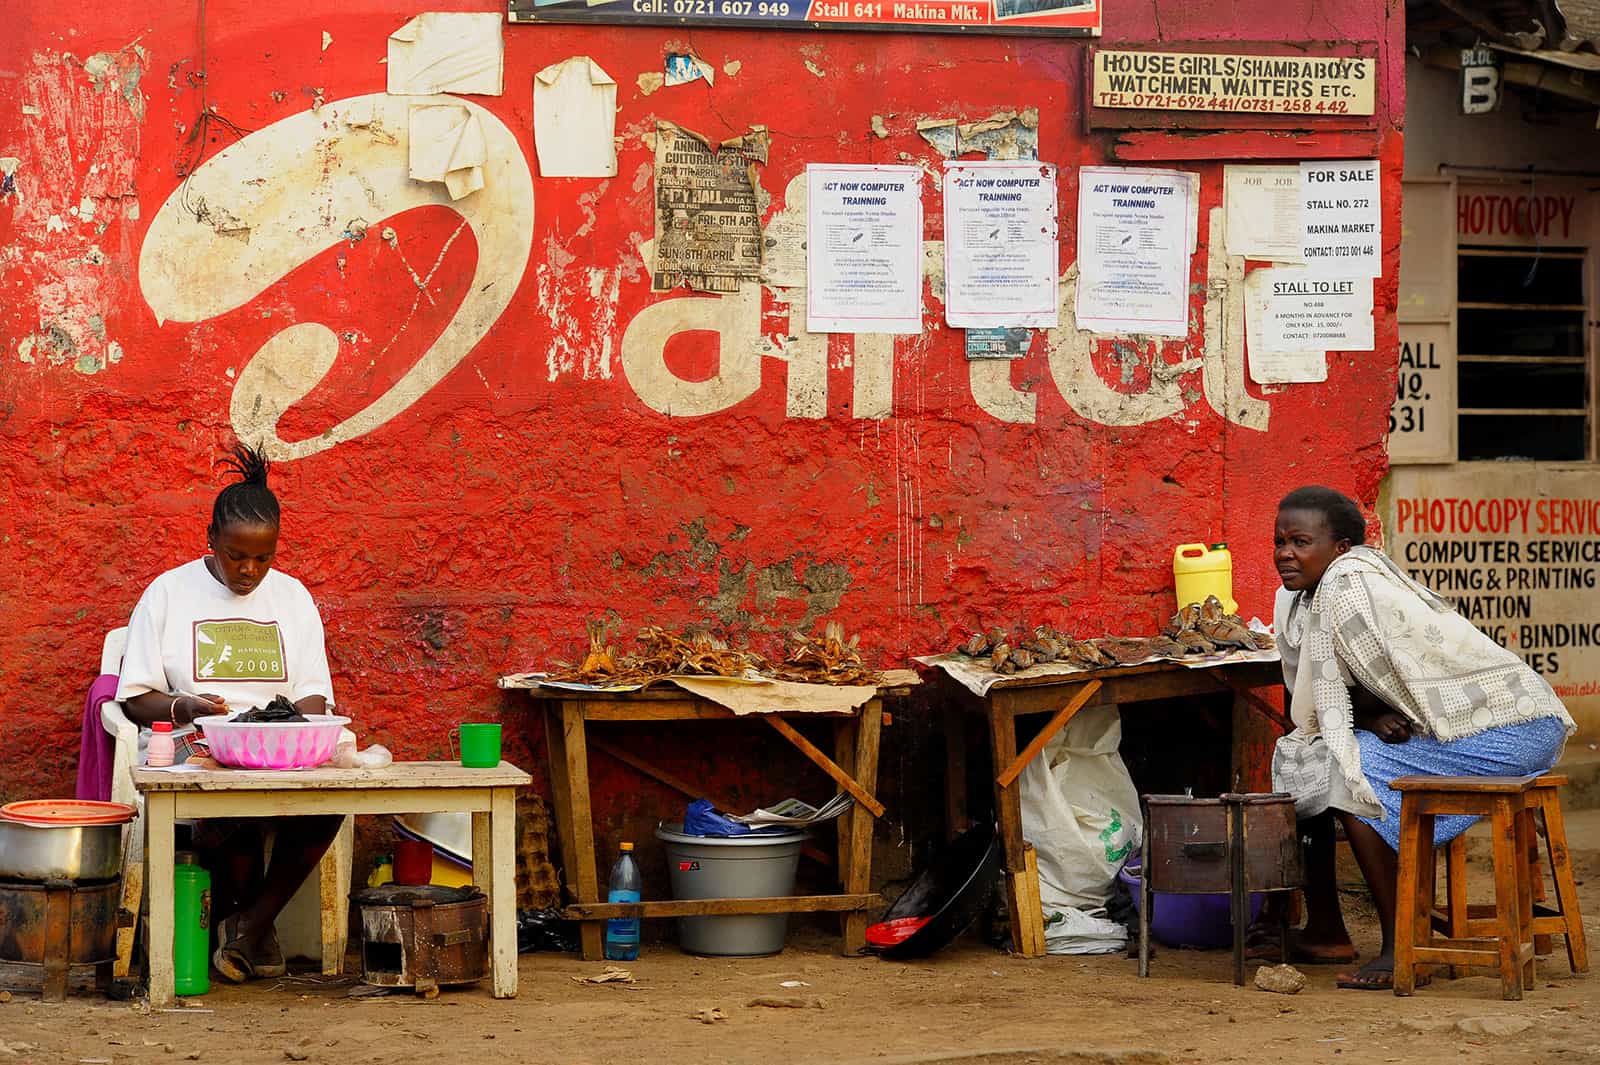 Women selling at a market in a slum know for poverty tourism